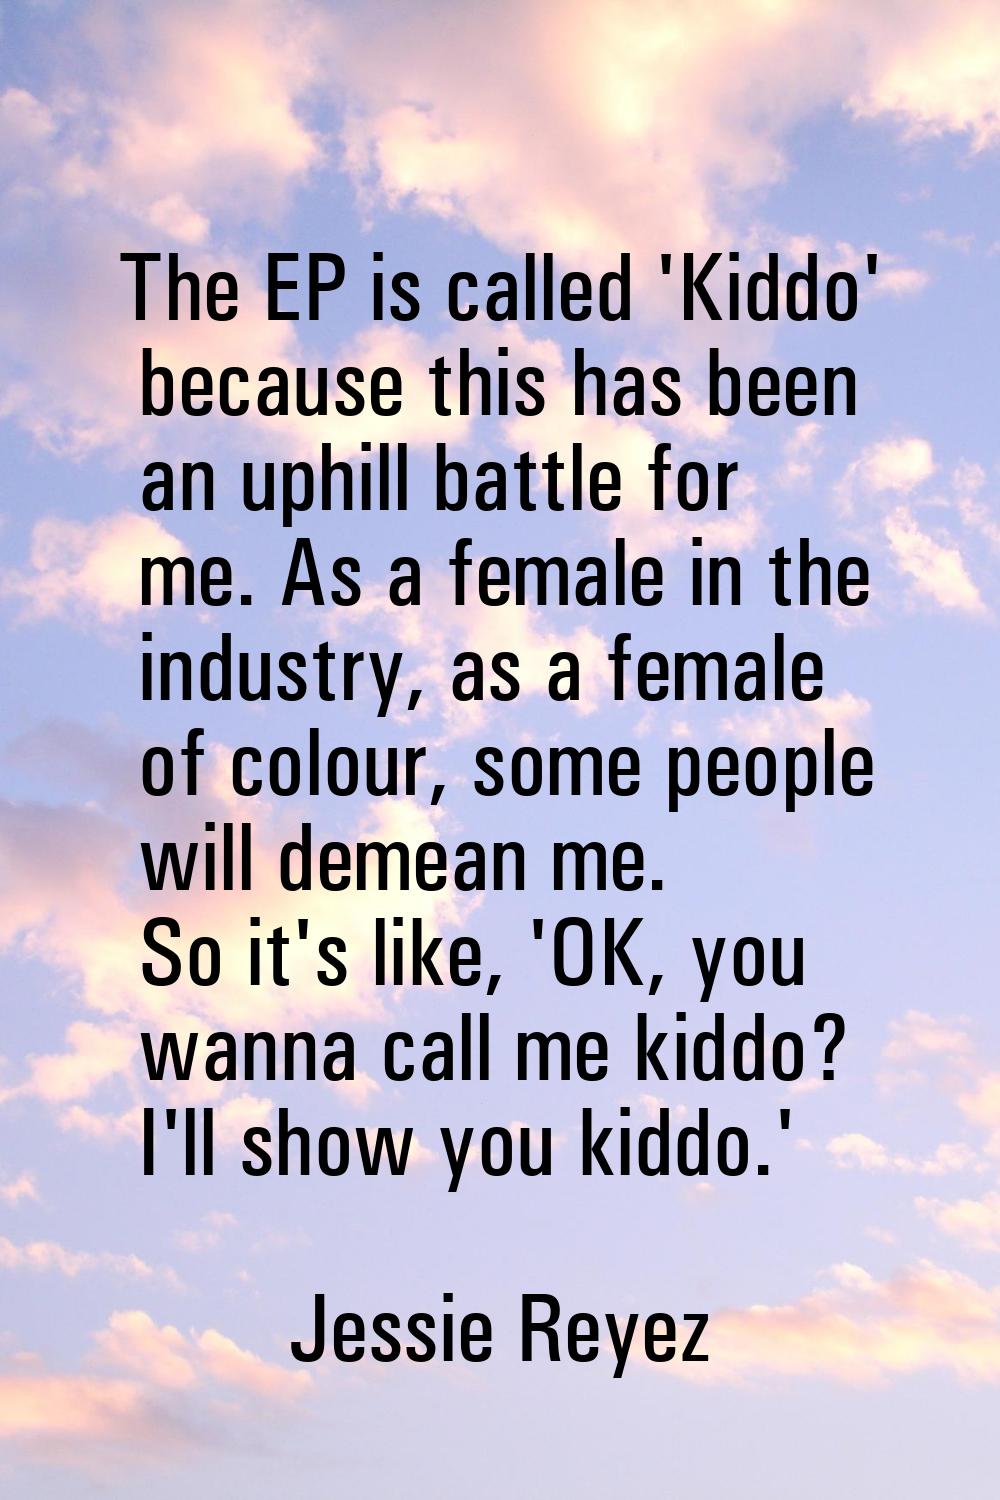 The EP is called 'Kiddo' because this has been an uphill battle for me. As a female in the industry